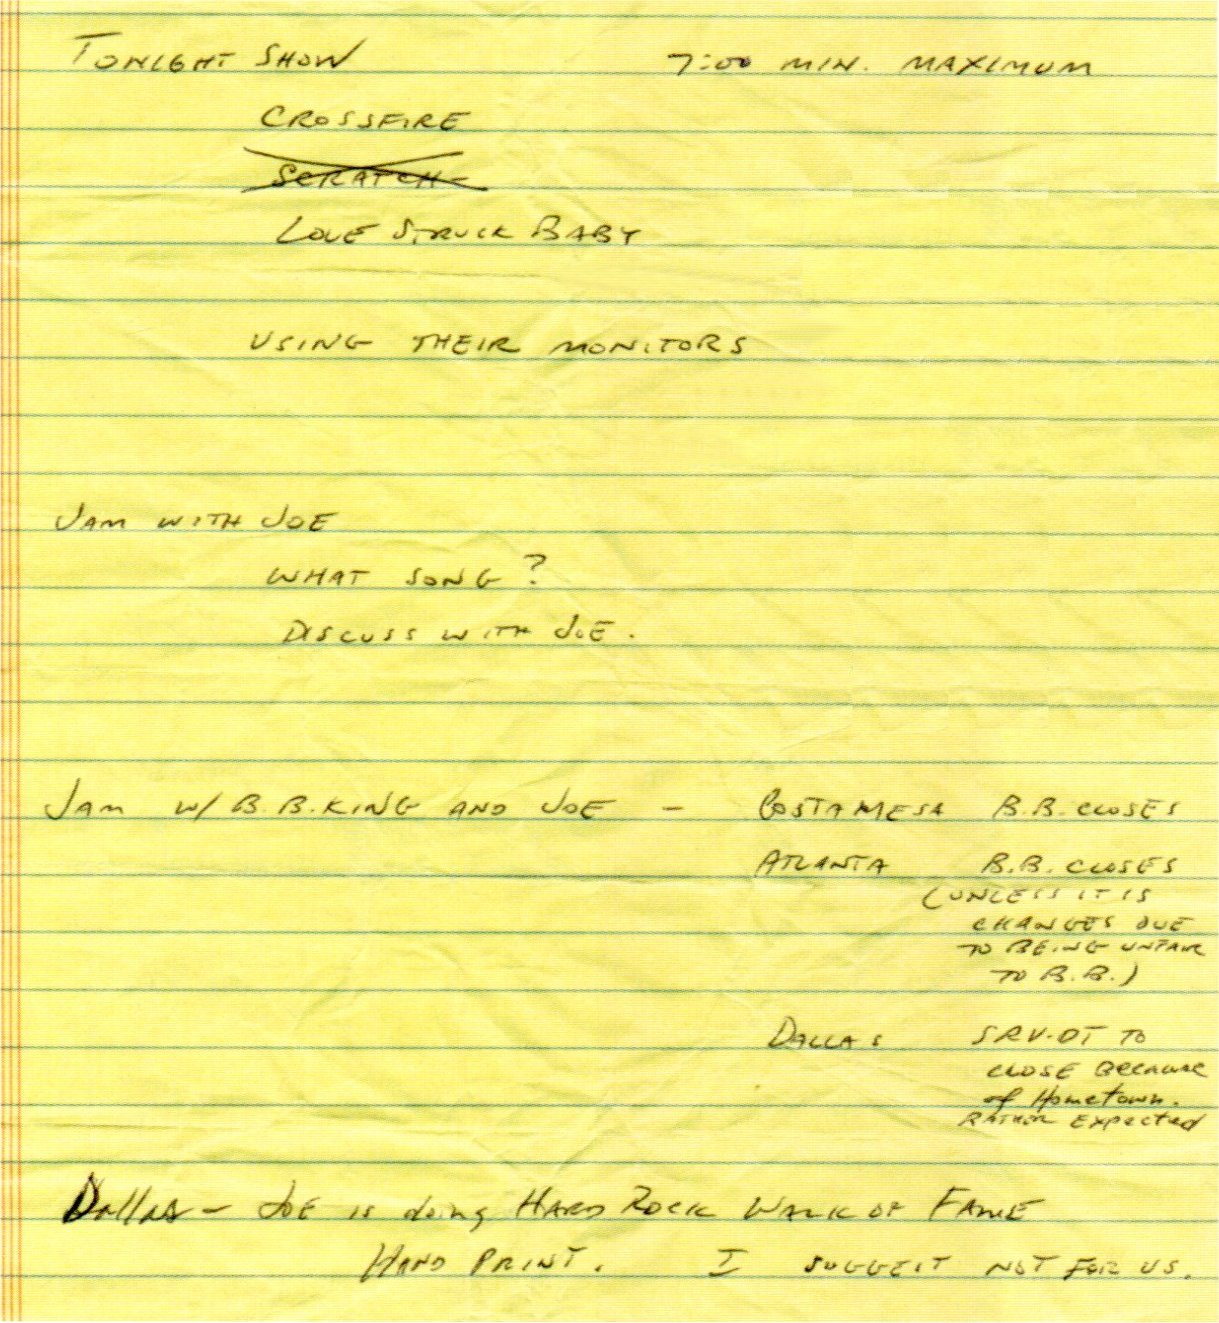 Stevie Ray Vaughan - Tonight Show and Tour Notes